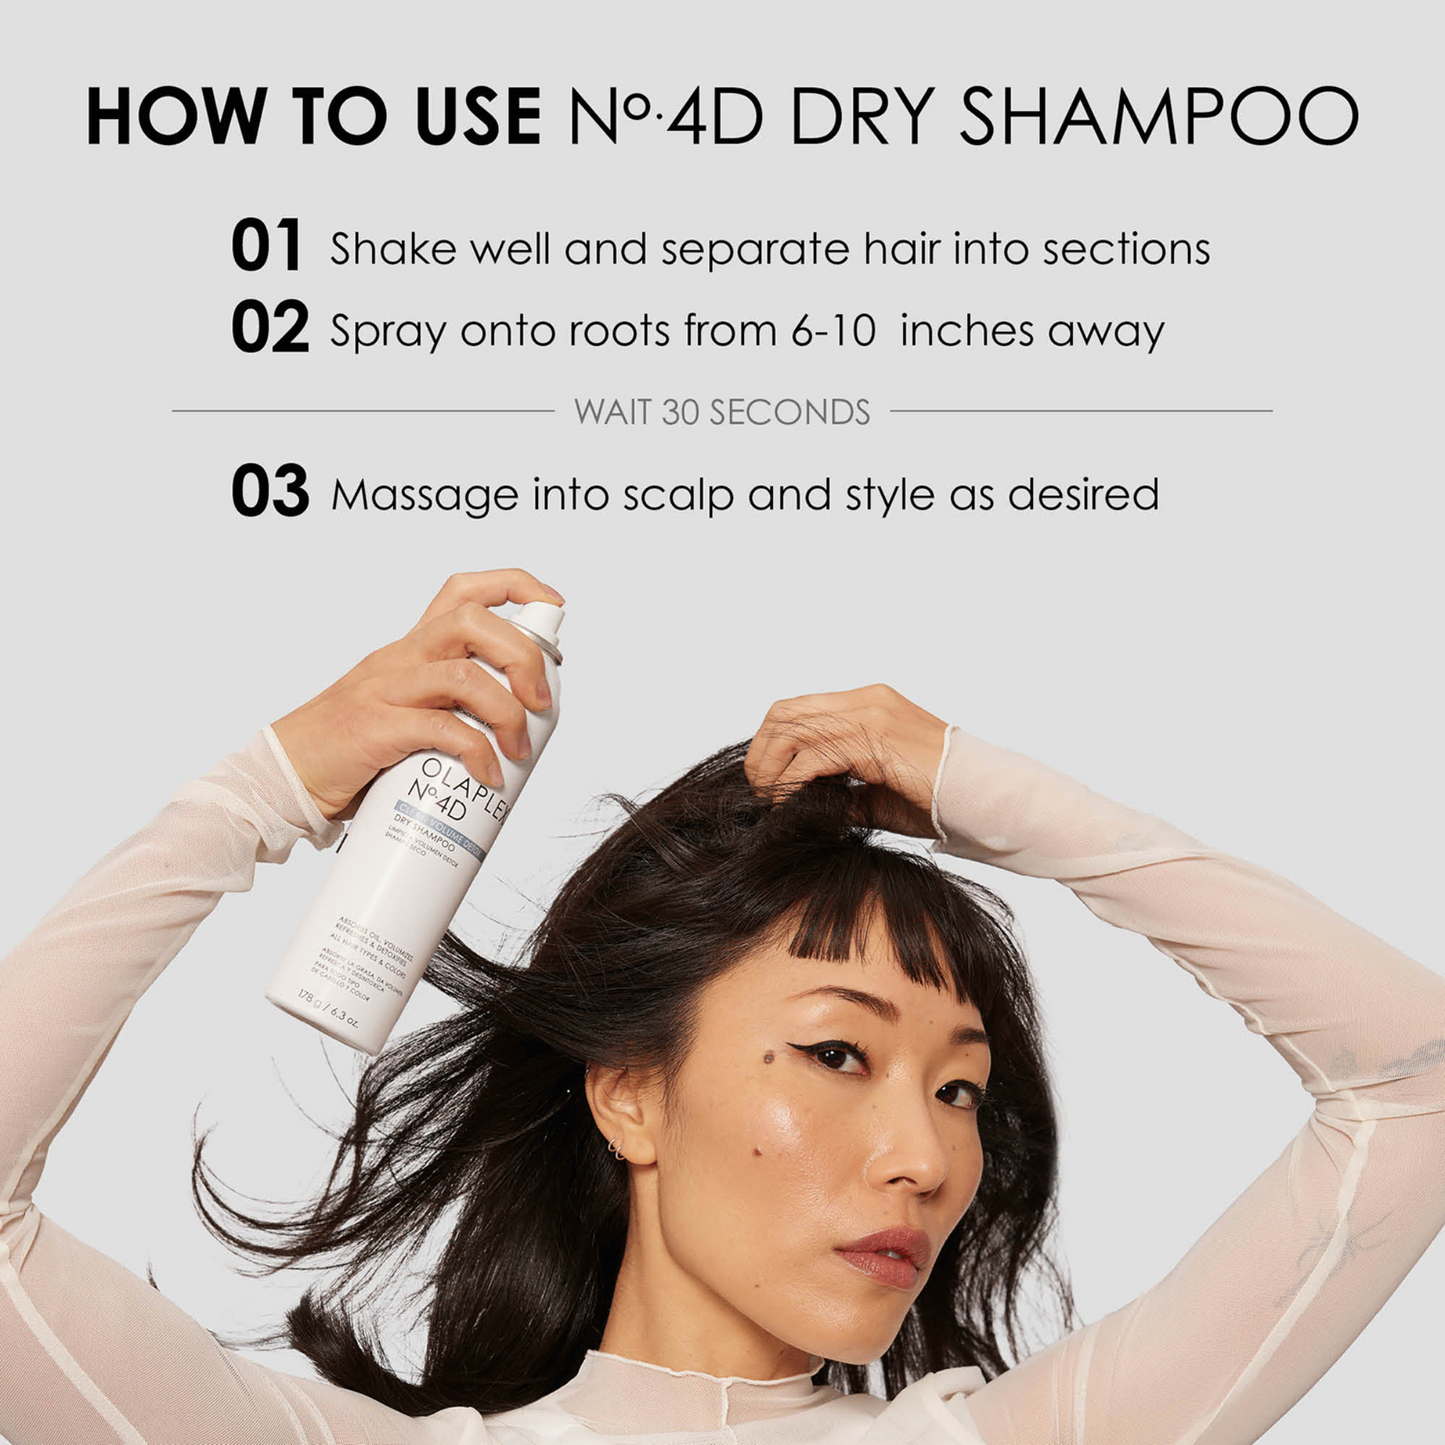 How to Use: Shake well before using. Separate hair into sections. Hold the bottle 6-10” away from hair and spray onto roots. Wait 30 seconds and massage into the scalp. When To Use: Instantly refresh hair between wash days or use on clean, dry hair to extend and amplify first-day styles.